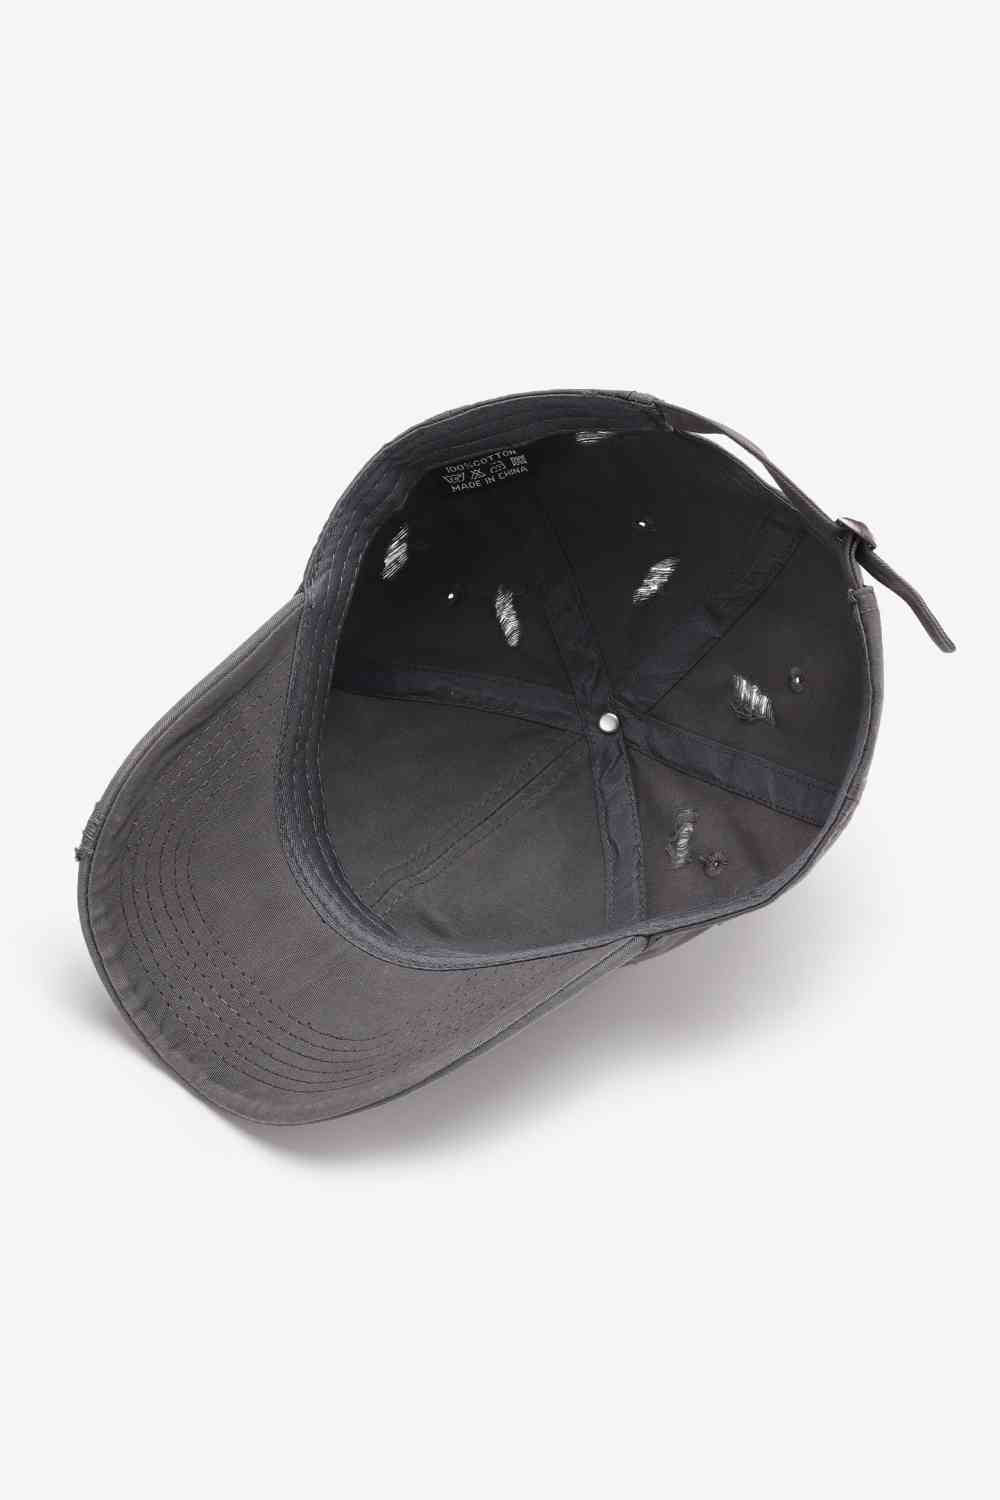 Ashen Twilight Distressed Adjustable 100% Cotton Womens Cap | Hypoallergenic - Allergy Friendly - Naturally Free